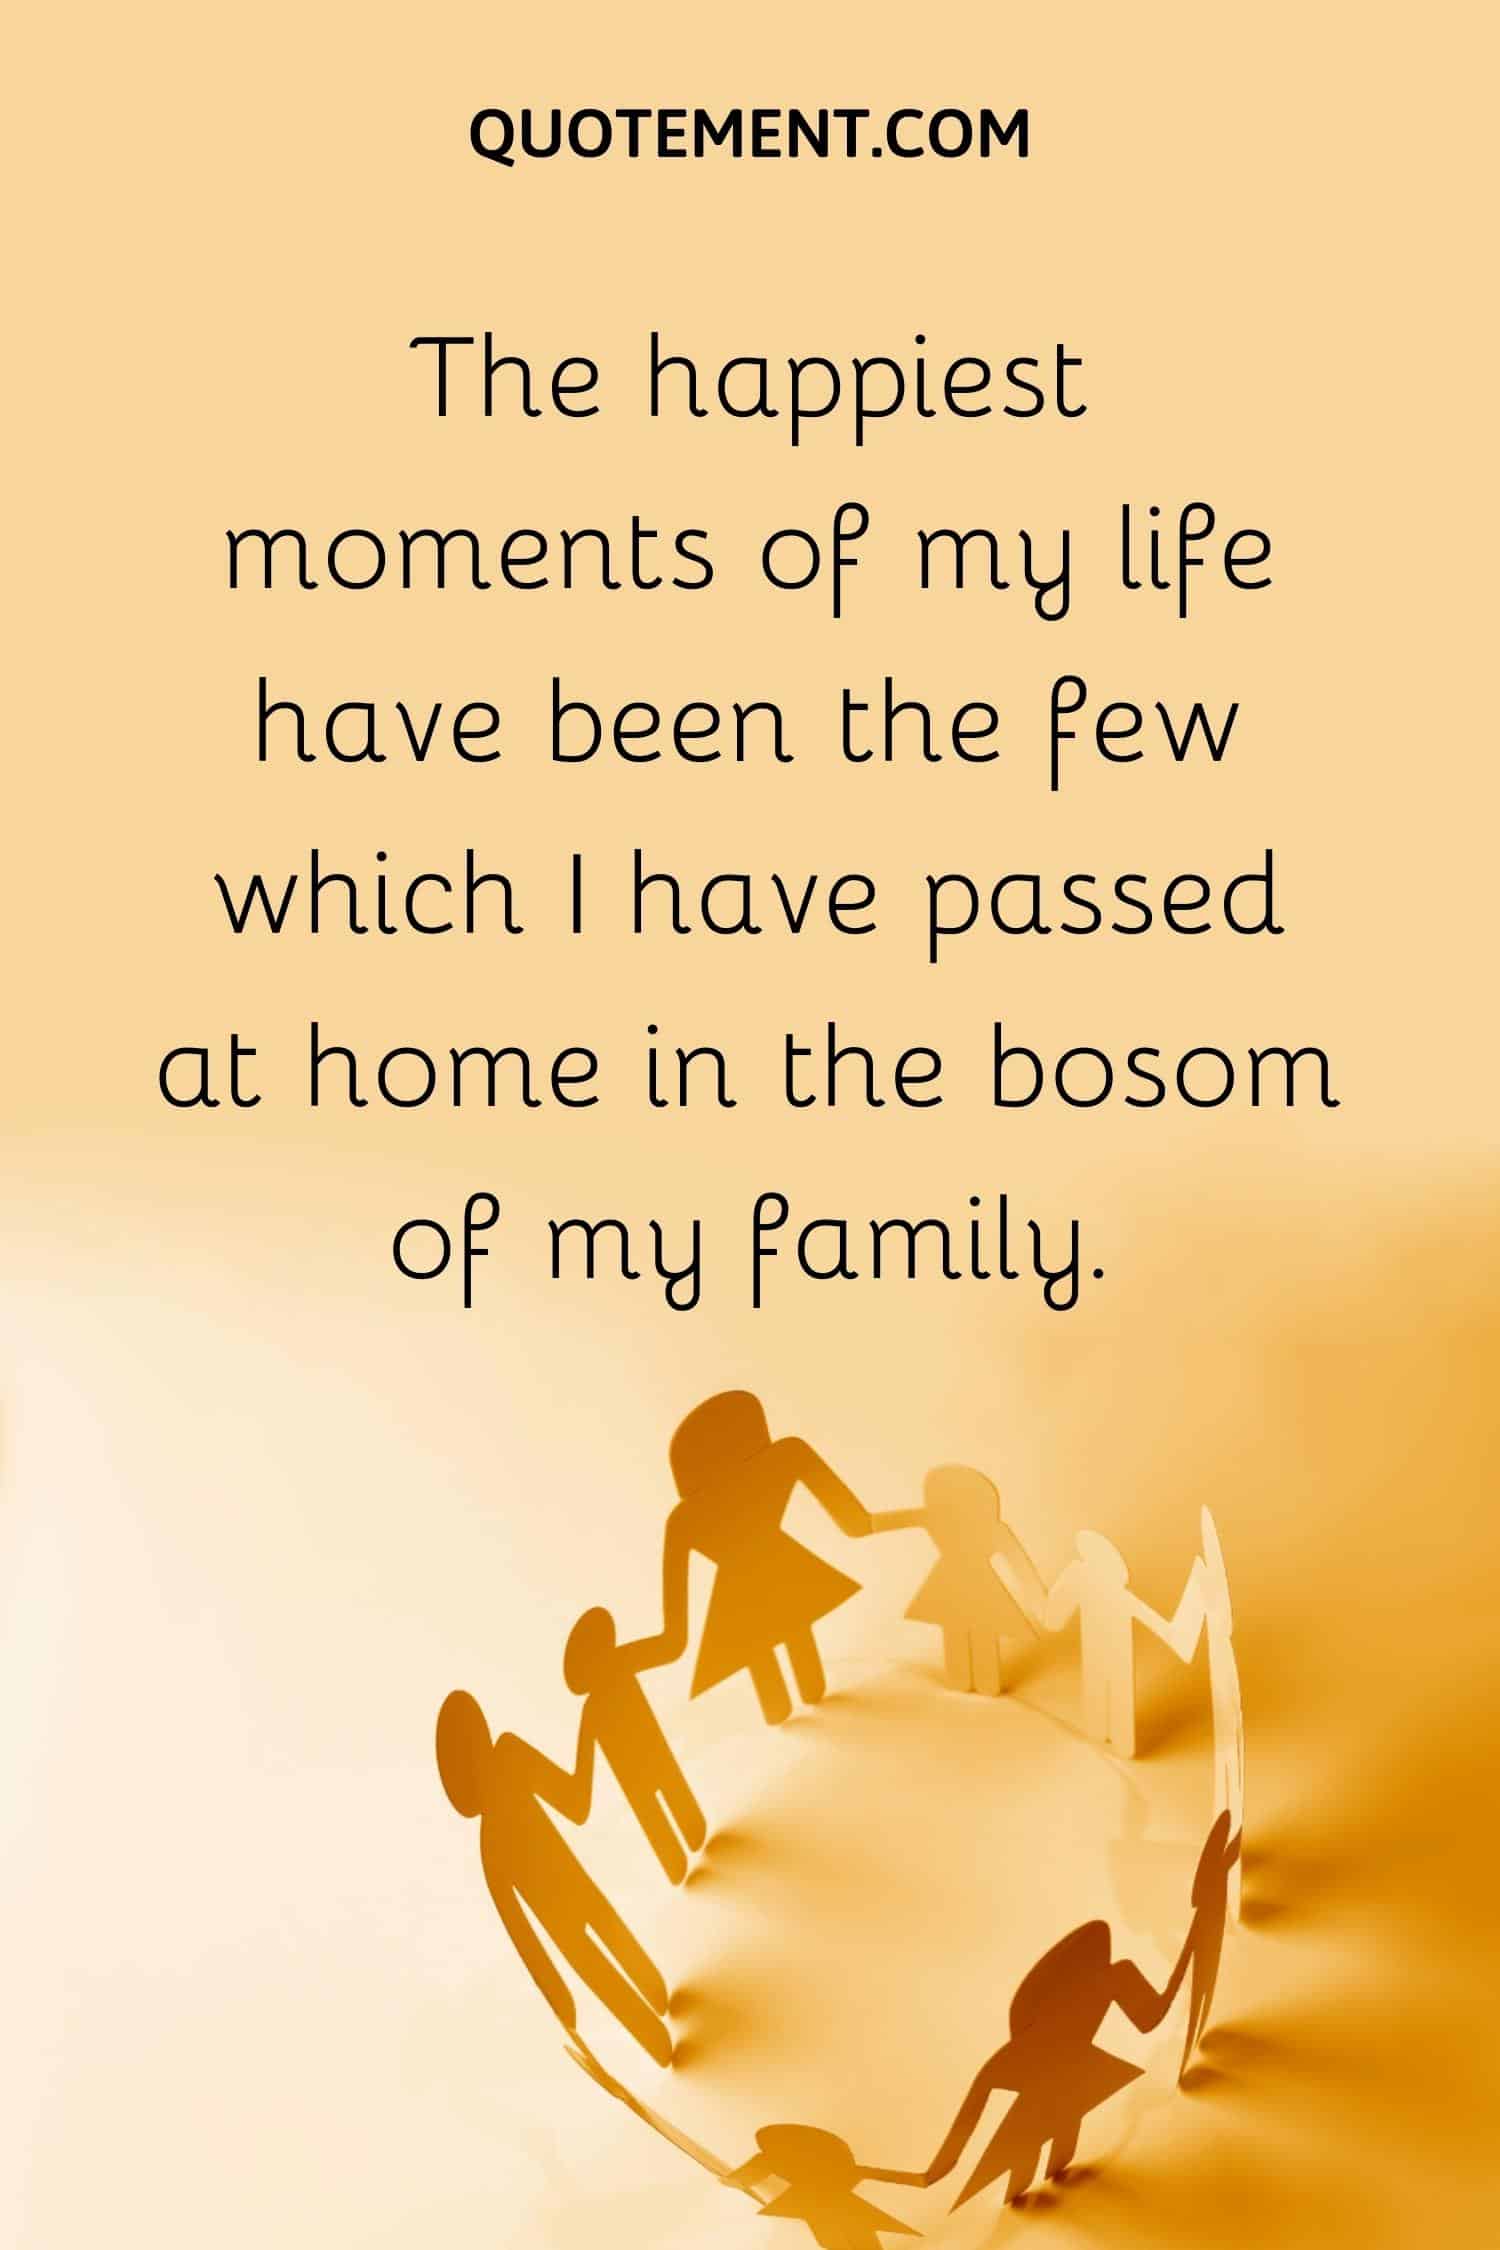 The happiest moments of my life have been the few which I have passed at home in the bosom of my family